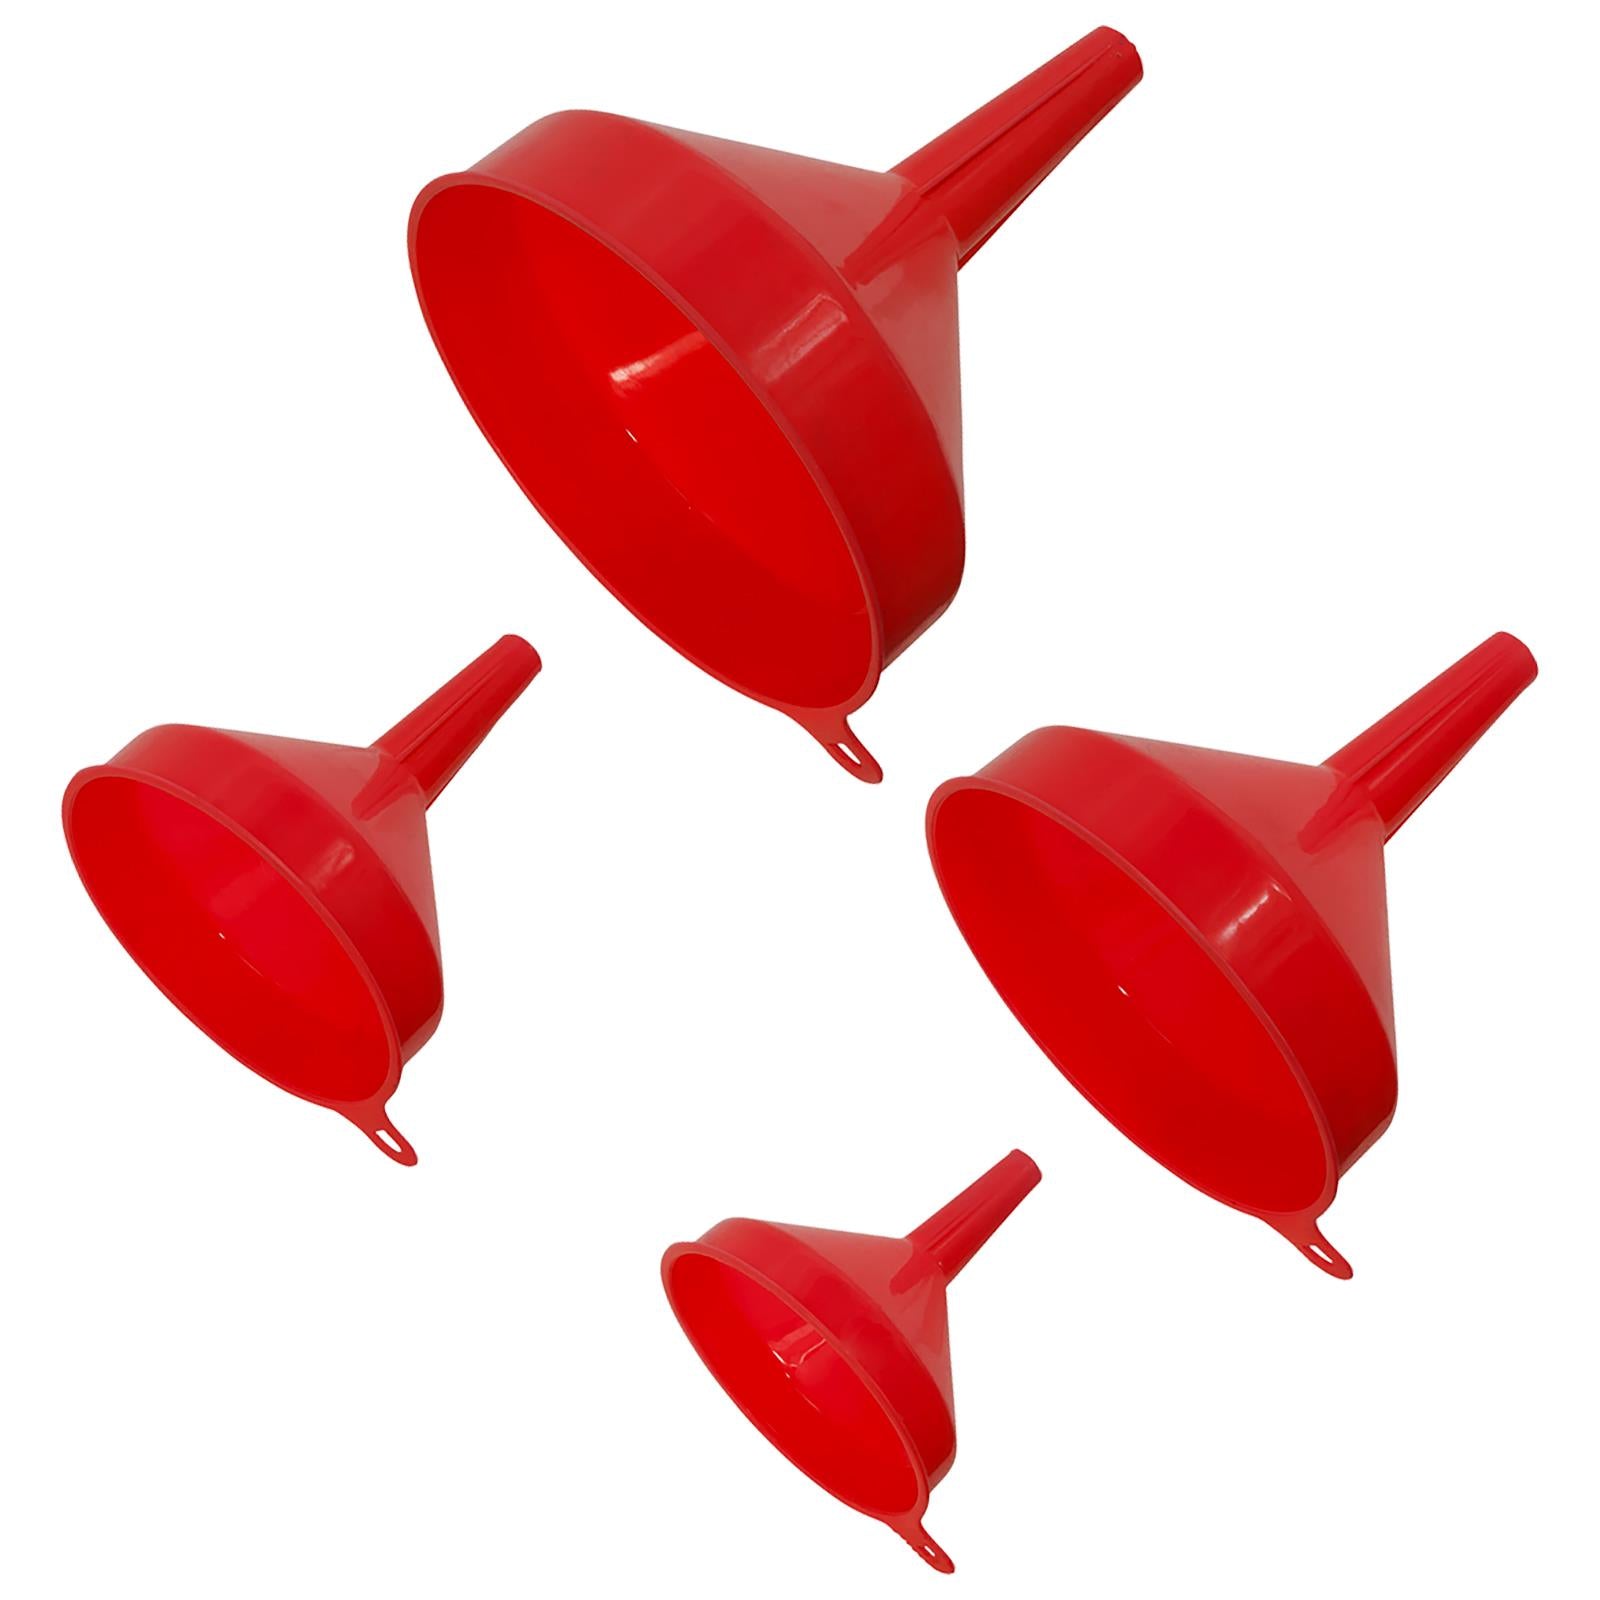 Sealey Funnel Set Fixed Spout 4 Piece 77mmm-138mm